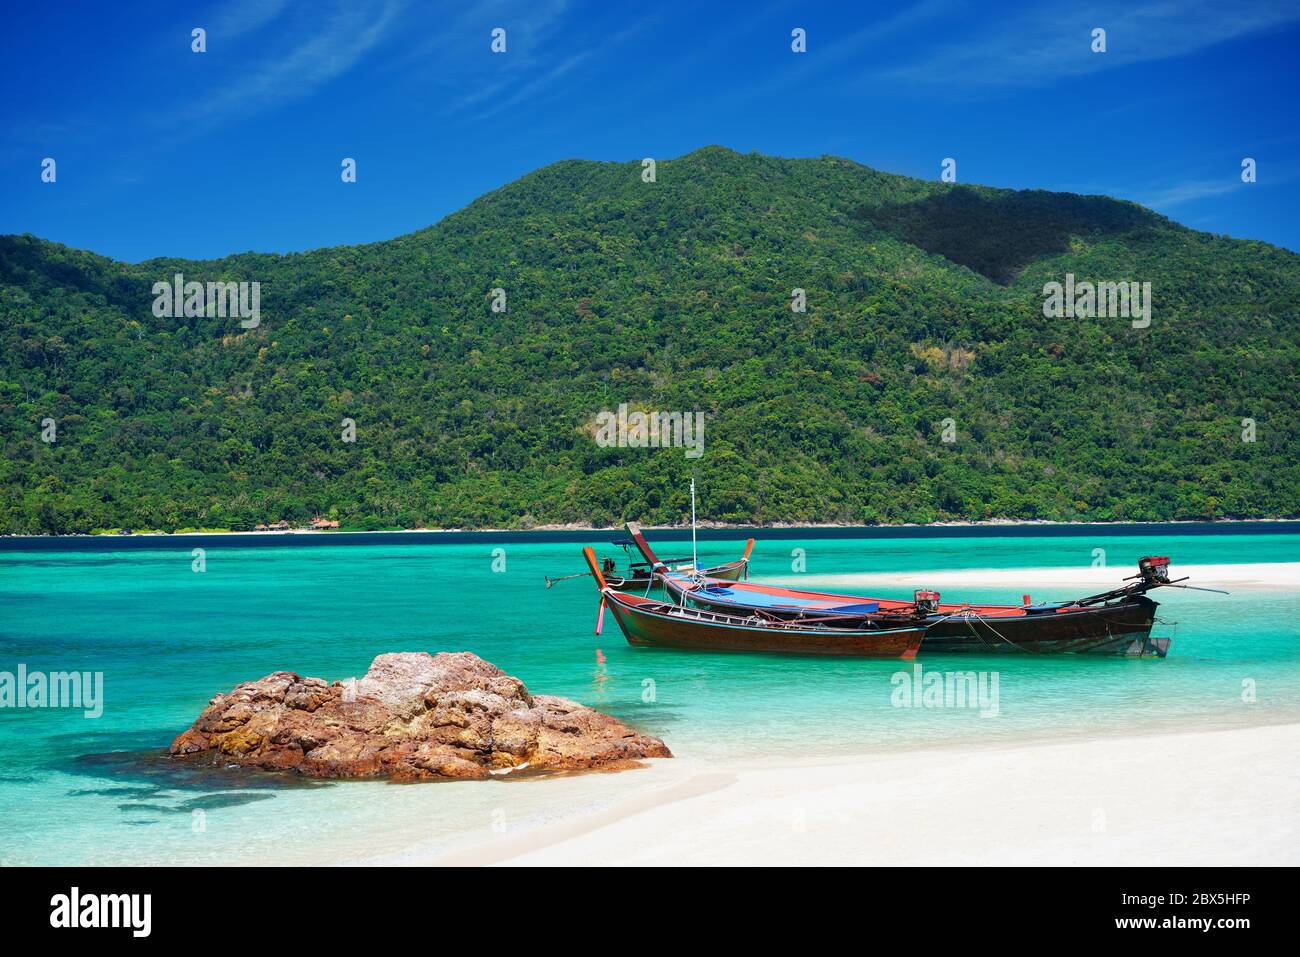 Boat on tropical sea coast with white sandy beach and turquoise water. Summer holiday background Stock Photo